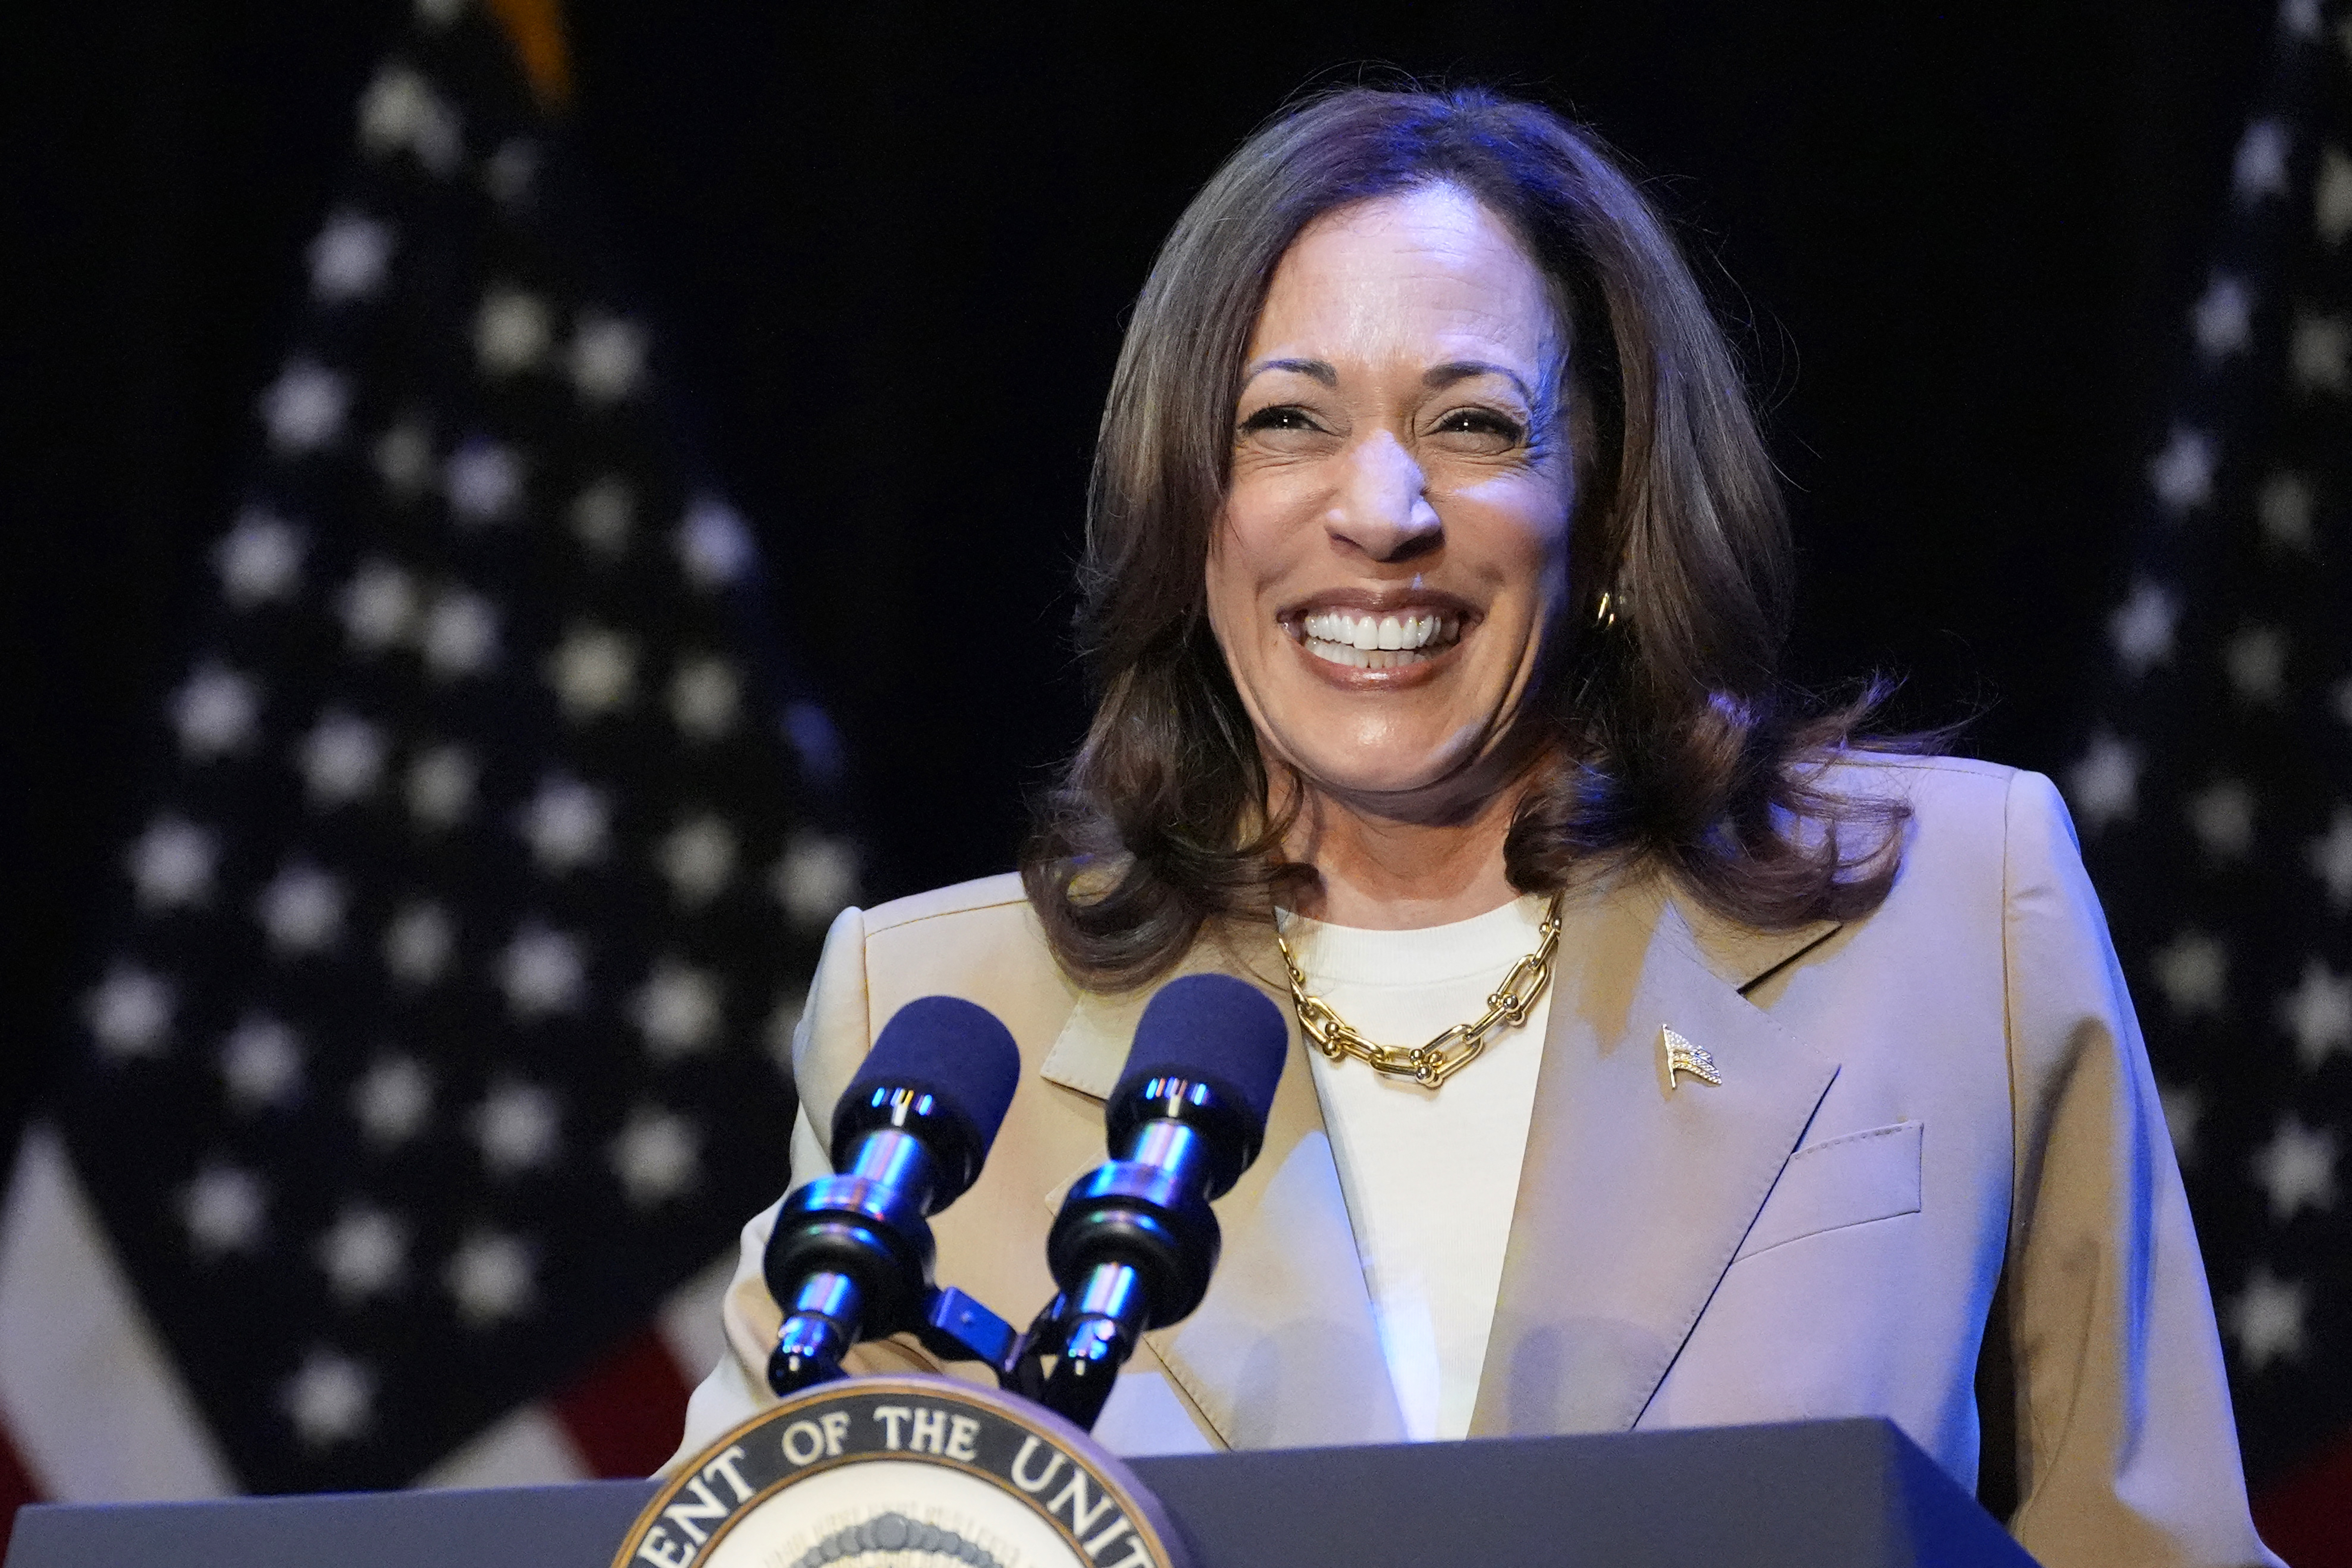 ‘Gen Z feels the Kamalove': Youth-led progressive groups hope Harris will energize young voters